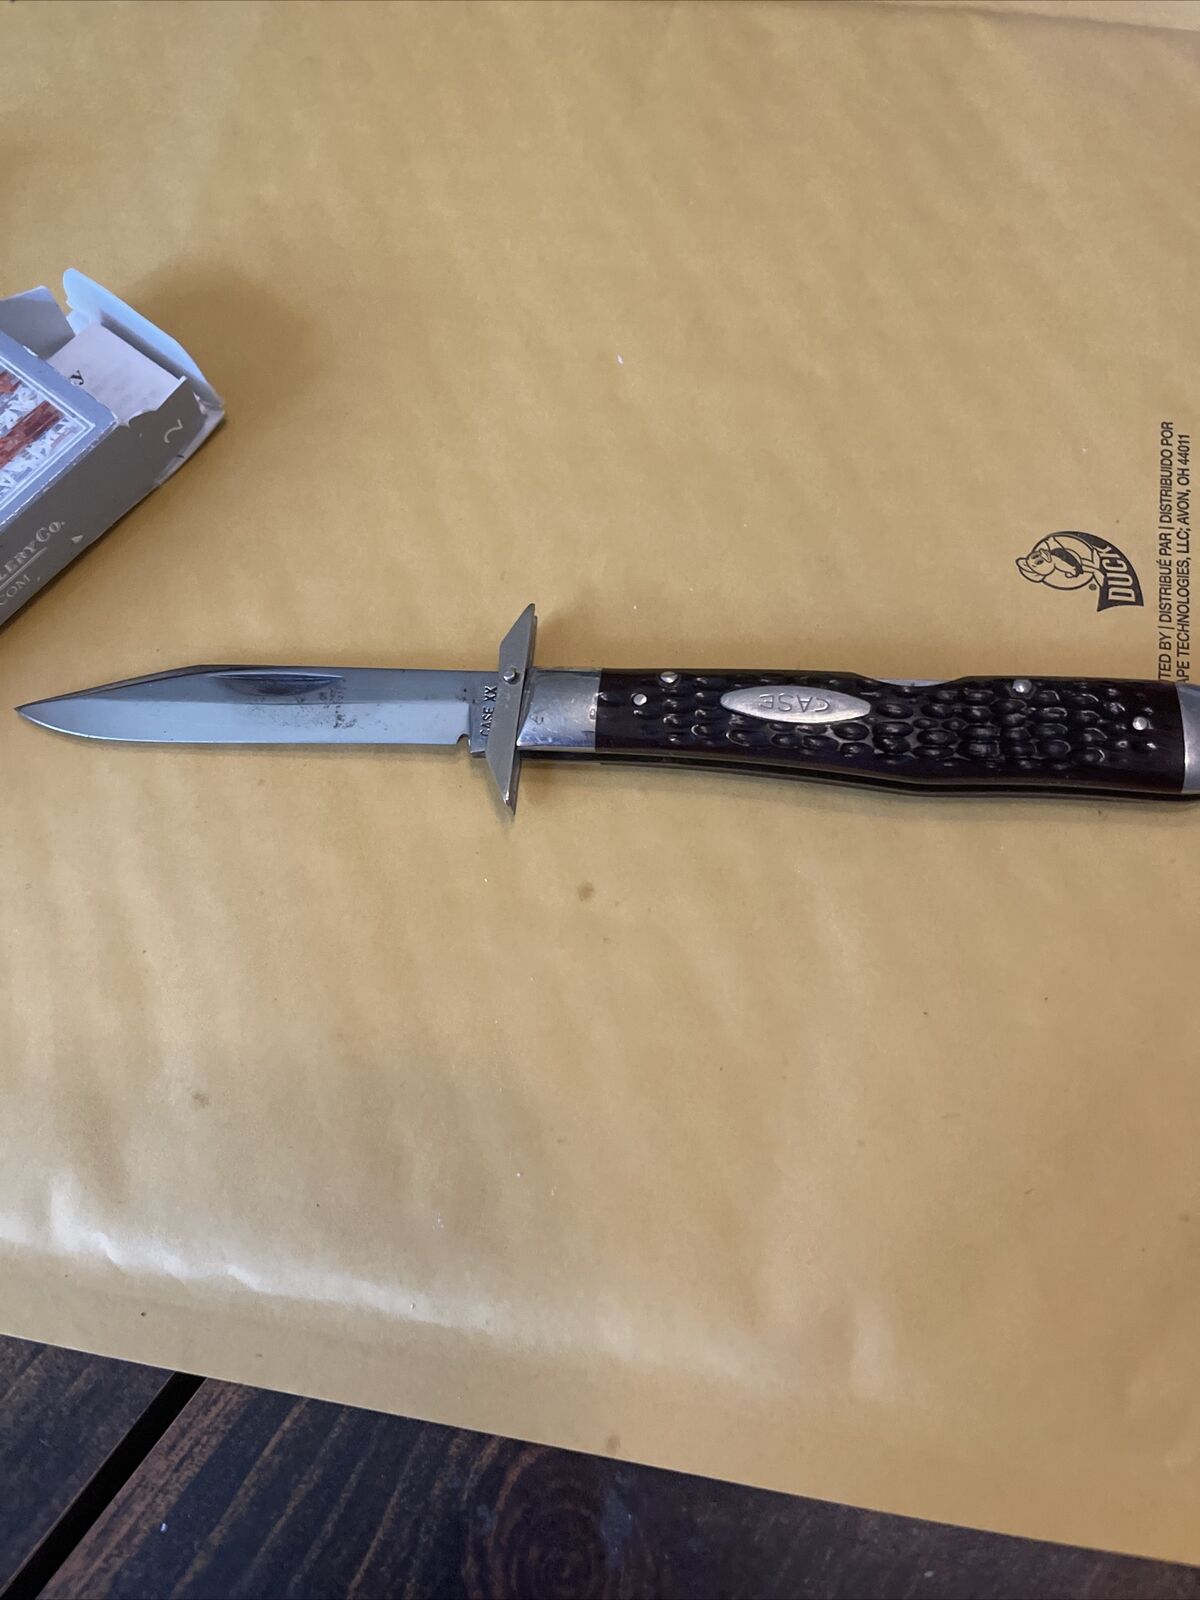 1973 Case Cheetah Knife In Great Shape For It’s Age 6111 1/2